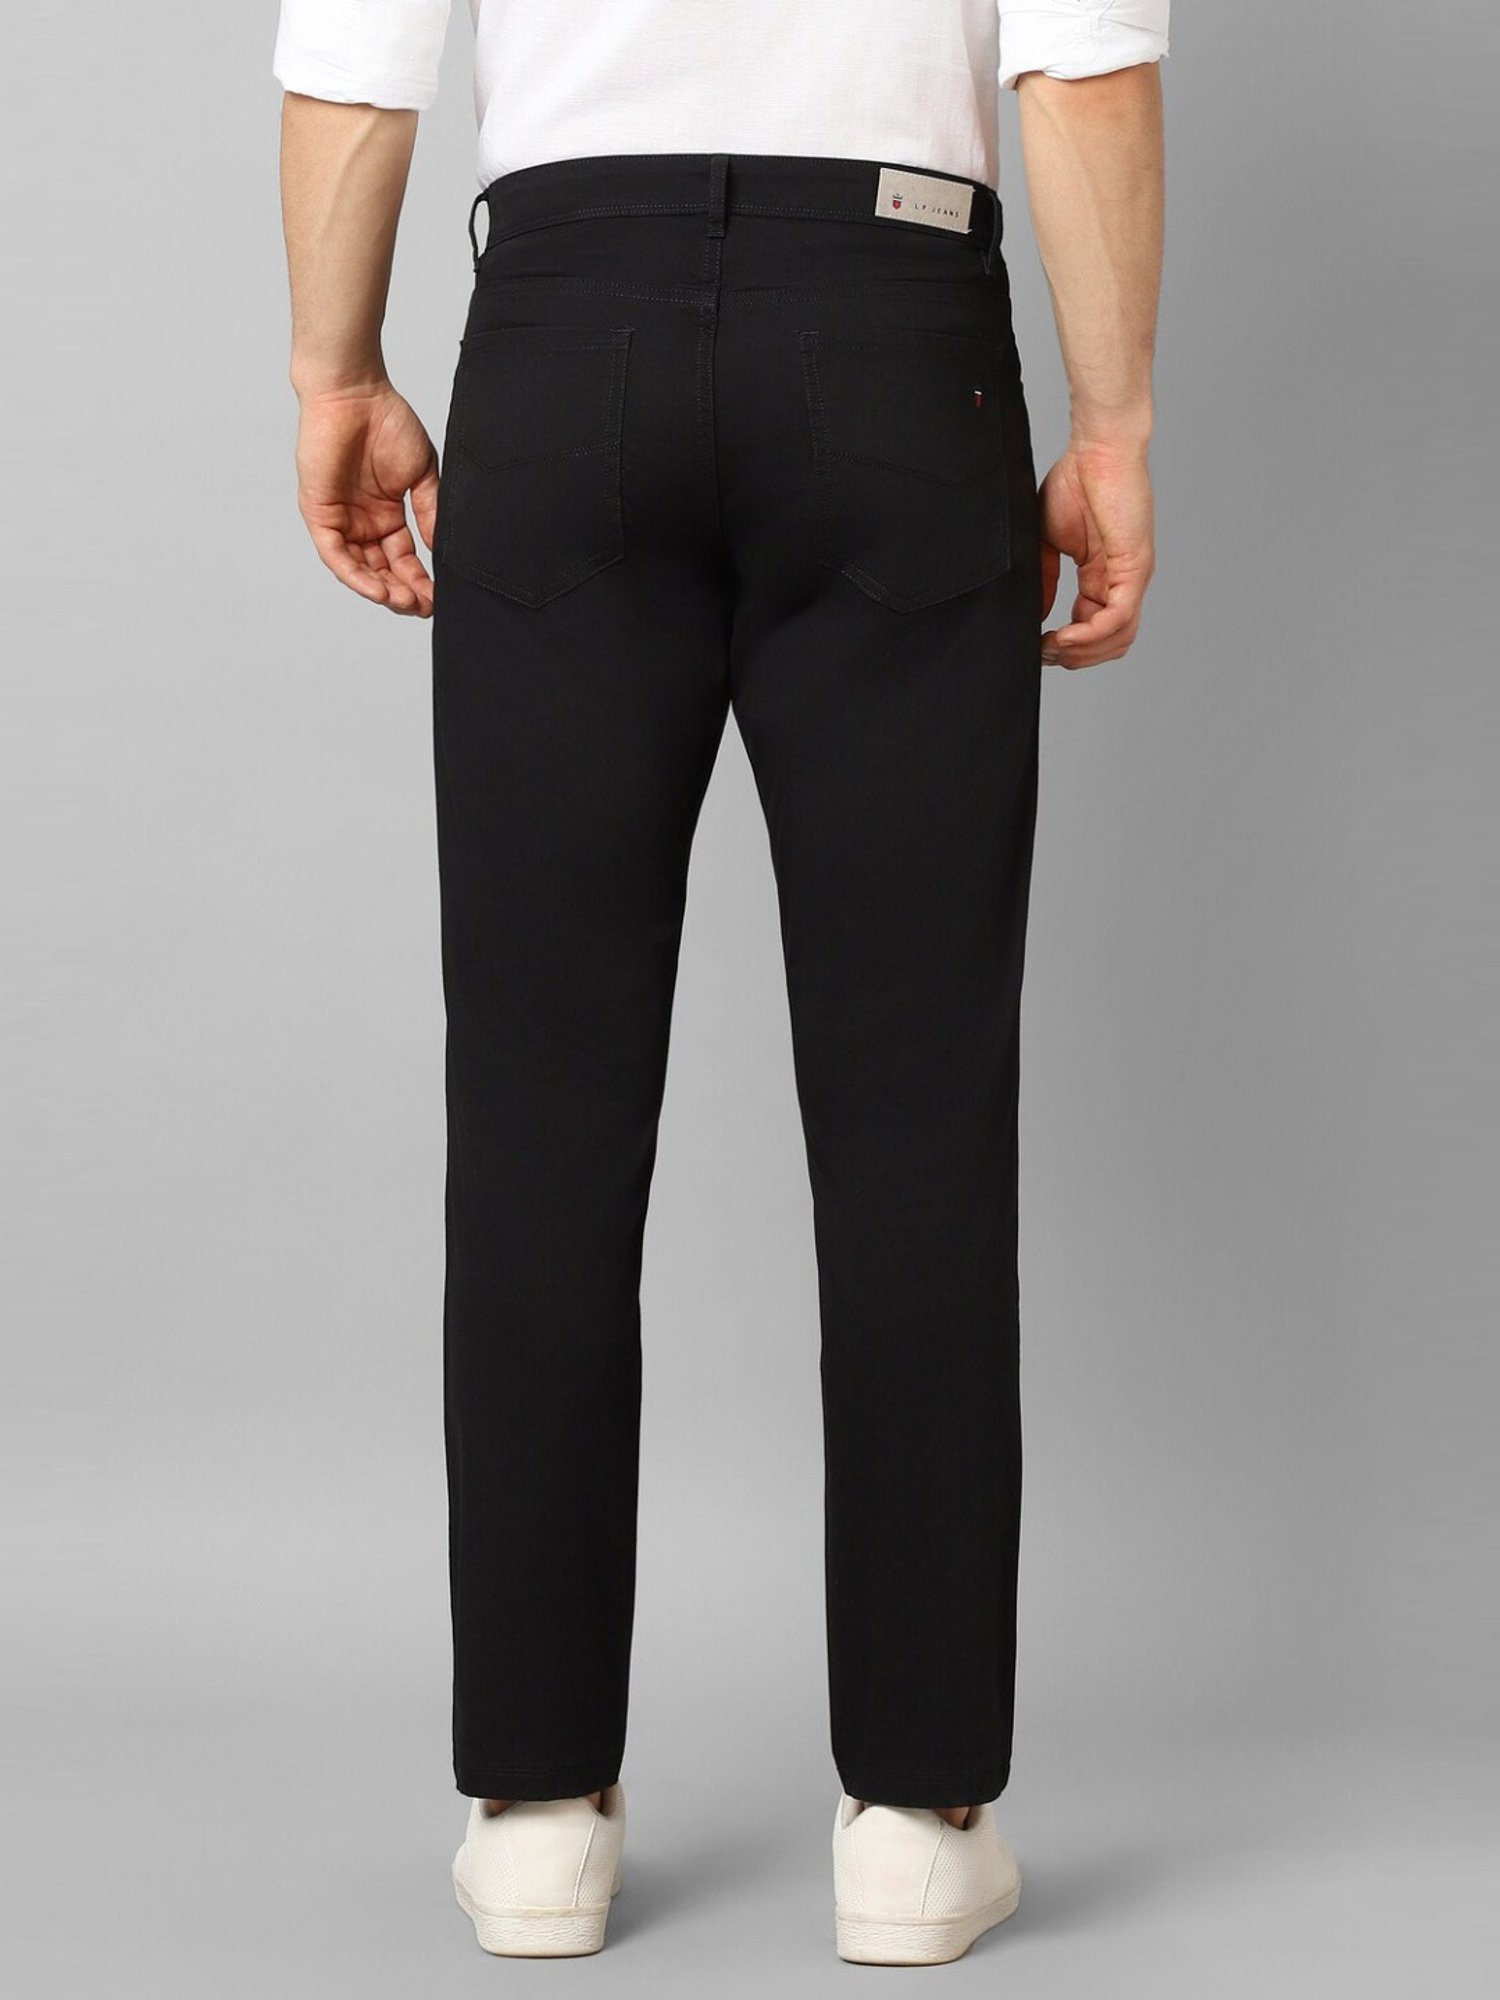 1128766 Black Trousers Stock Photos HighRes Pictures and Images   Getty Images